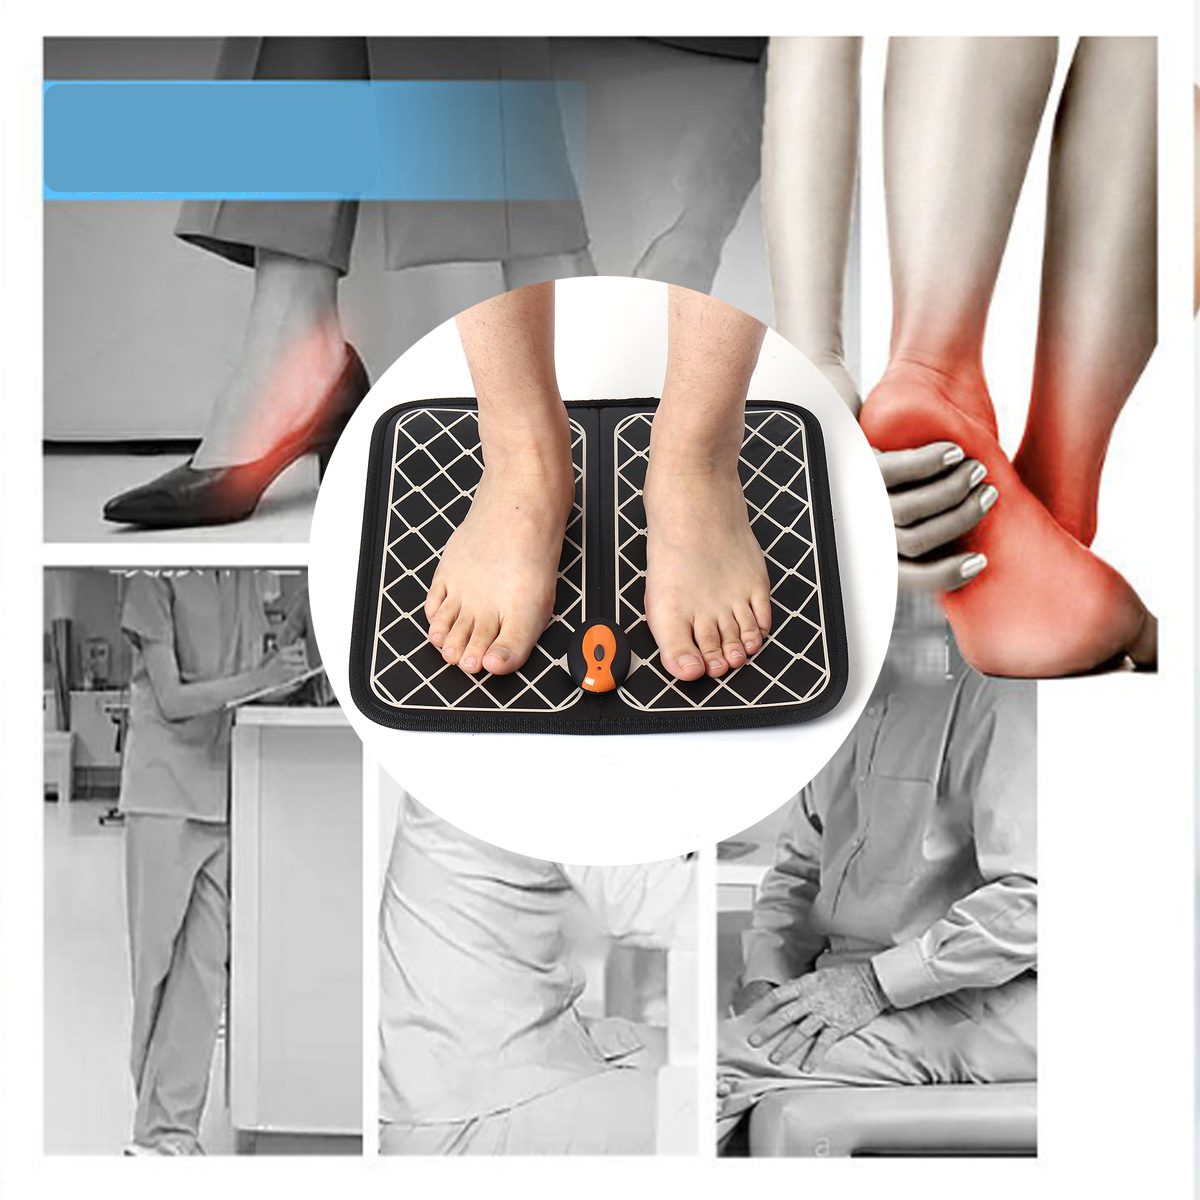 EMS-Portable-Shiatsu-Foot-Massager-Remote-controlled-Electric-Pad-Kneading-Circulation-Home-Electric-1508695-8